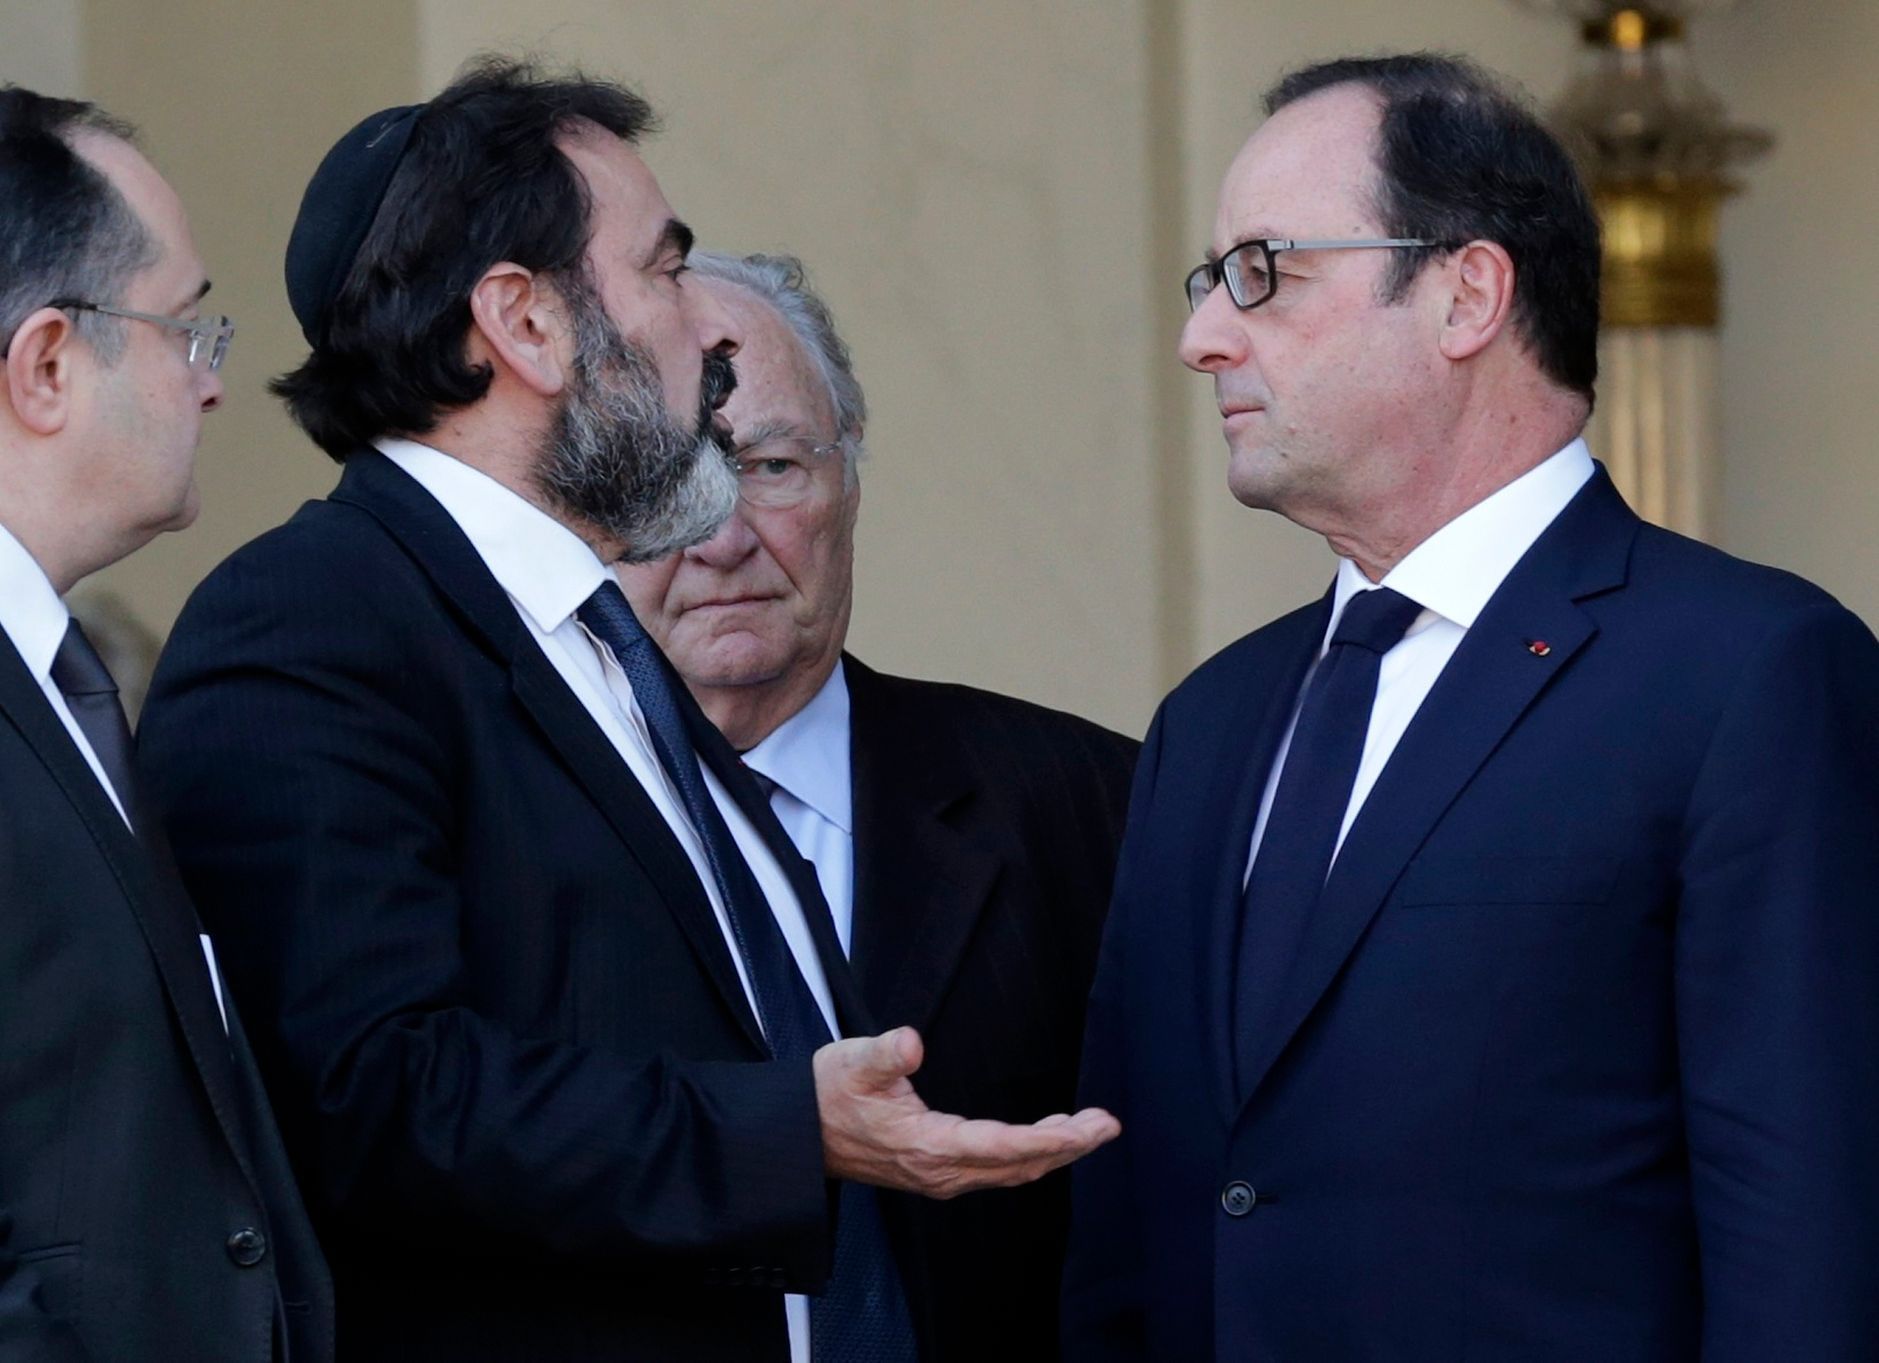 French President Francois Hollande speaks with Jewish central Consistory President Joel Mergui as Roger Cukierman, President of the Representative Council of France's Jewish Associations (CRIF) stands